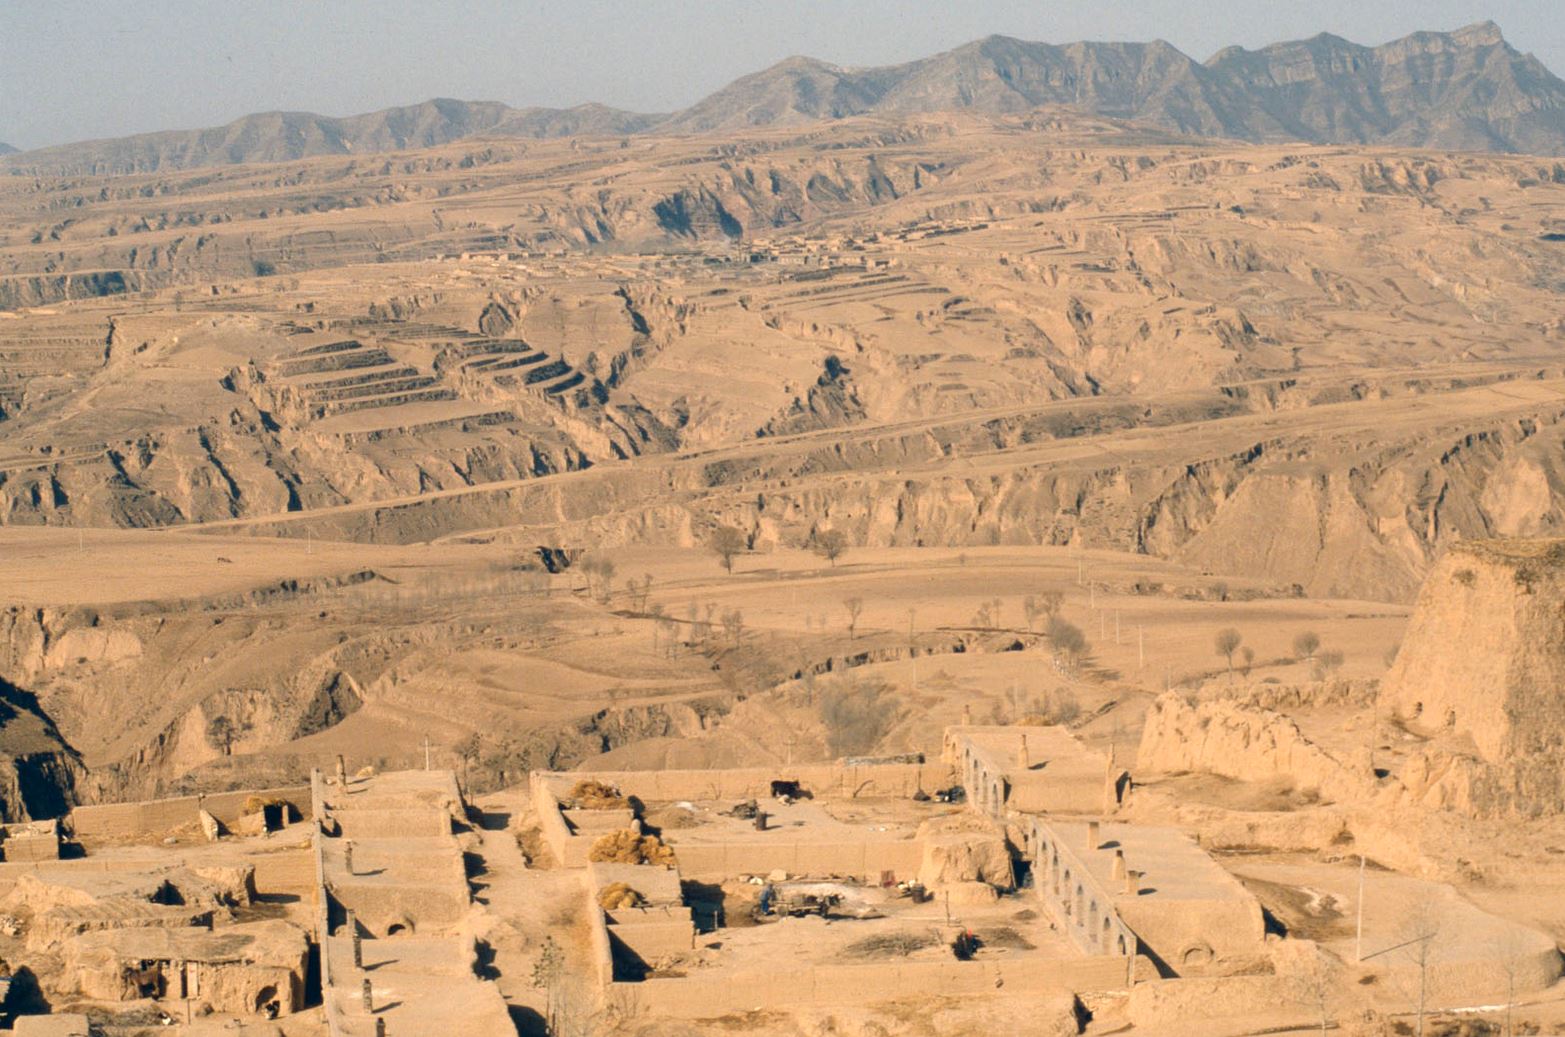 Loess Plateau in China. The loess is so highly compacted that buildings and homes have been carved in it.